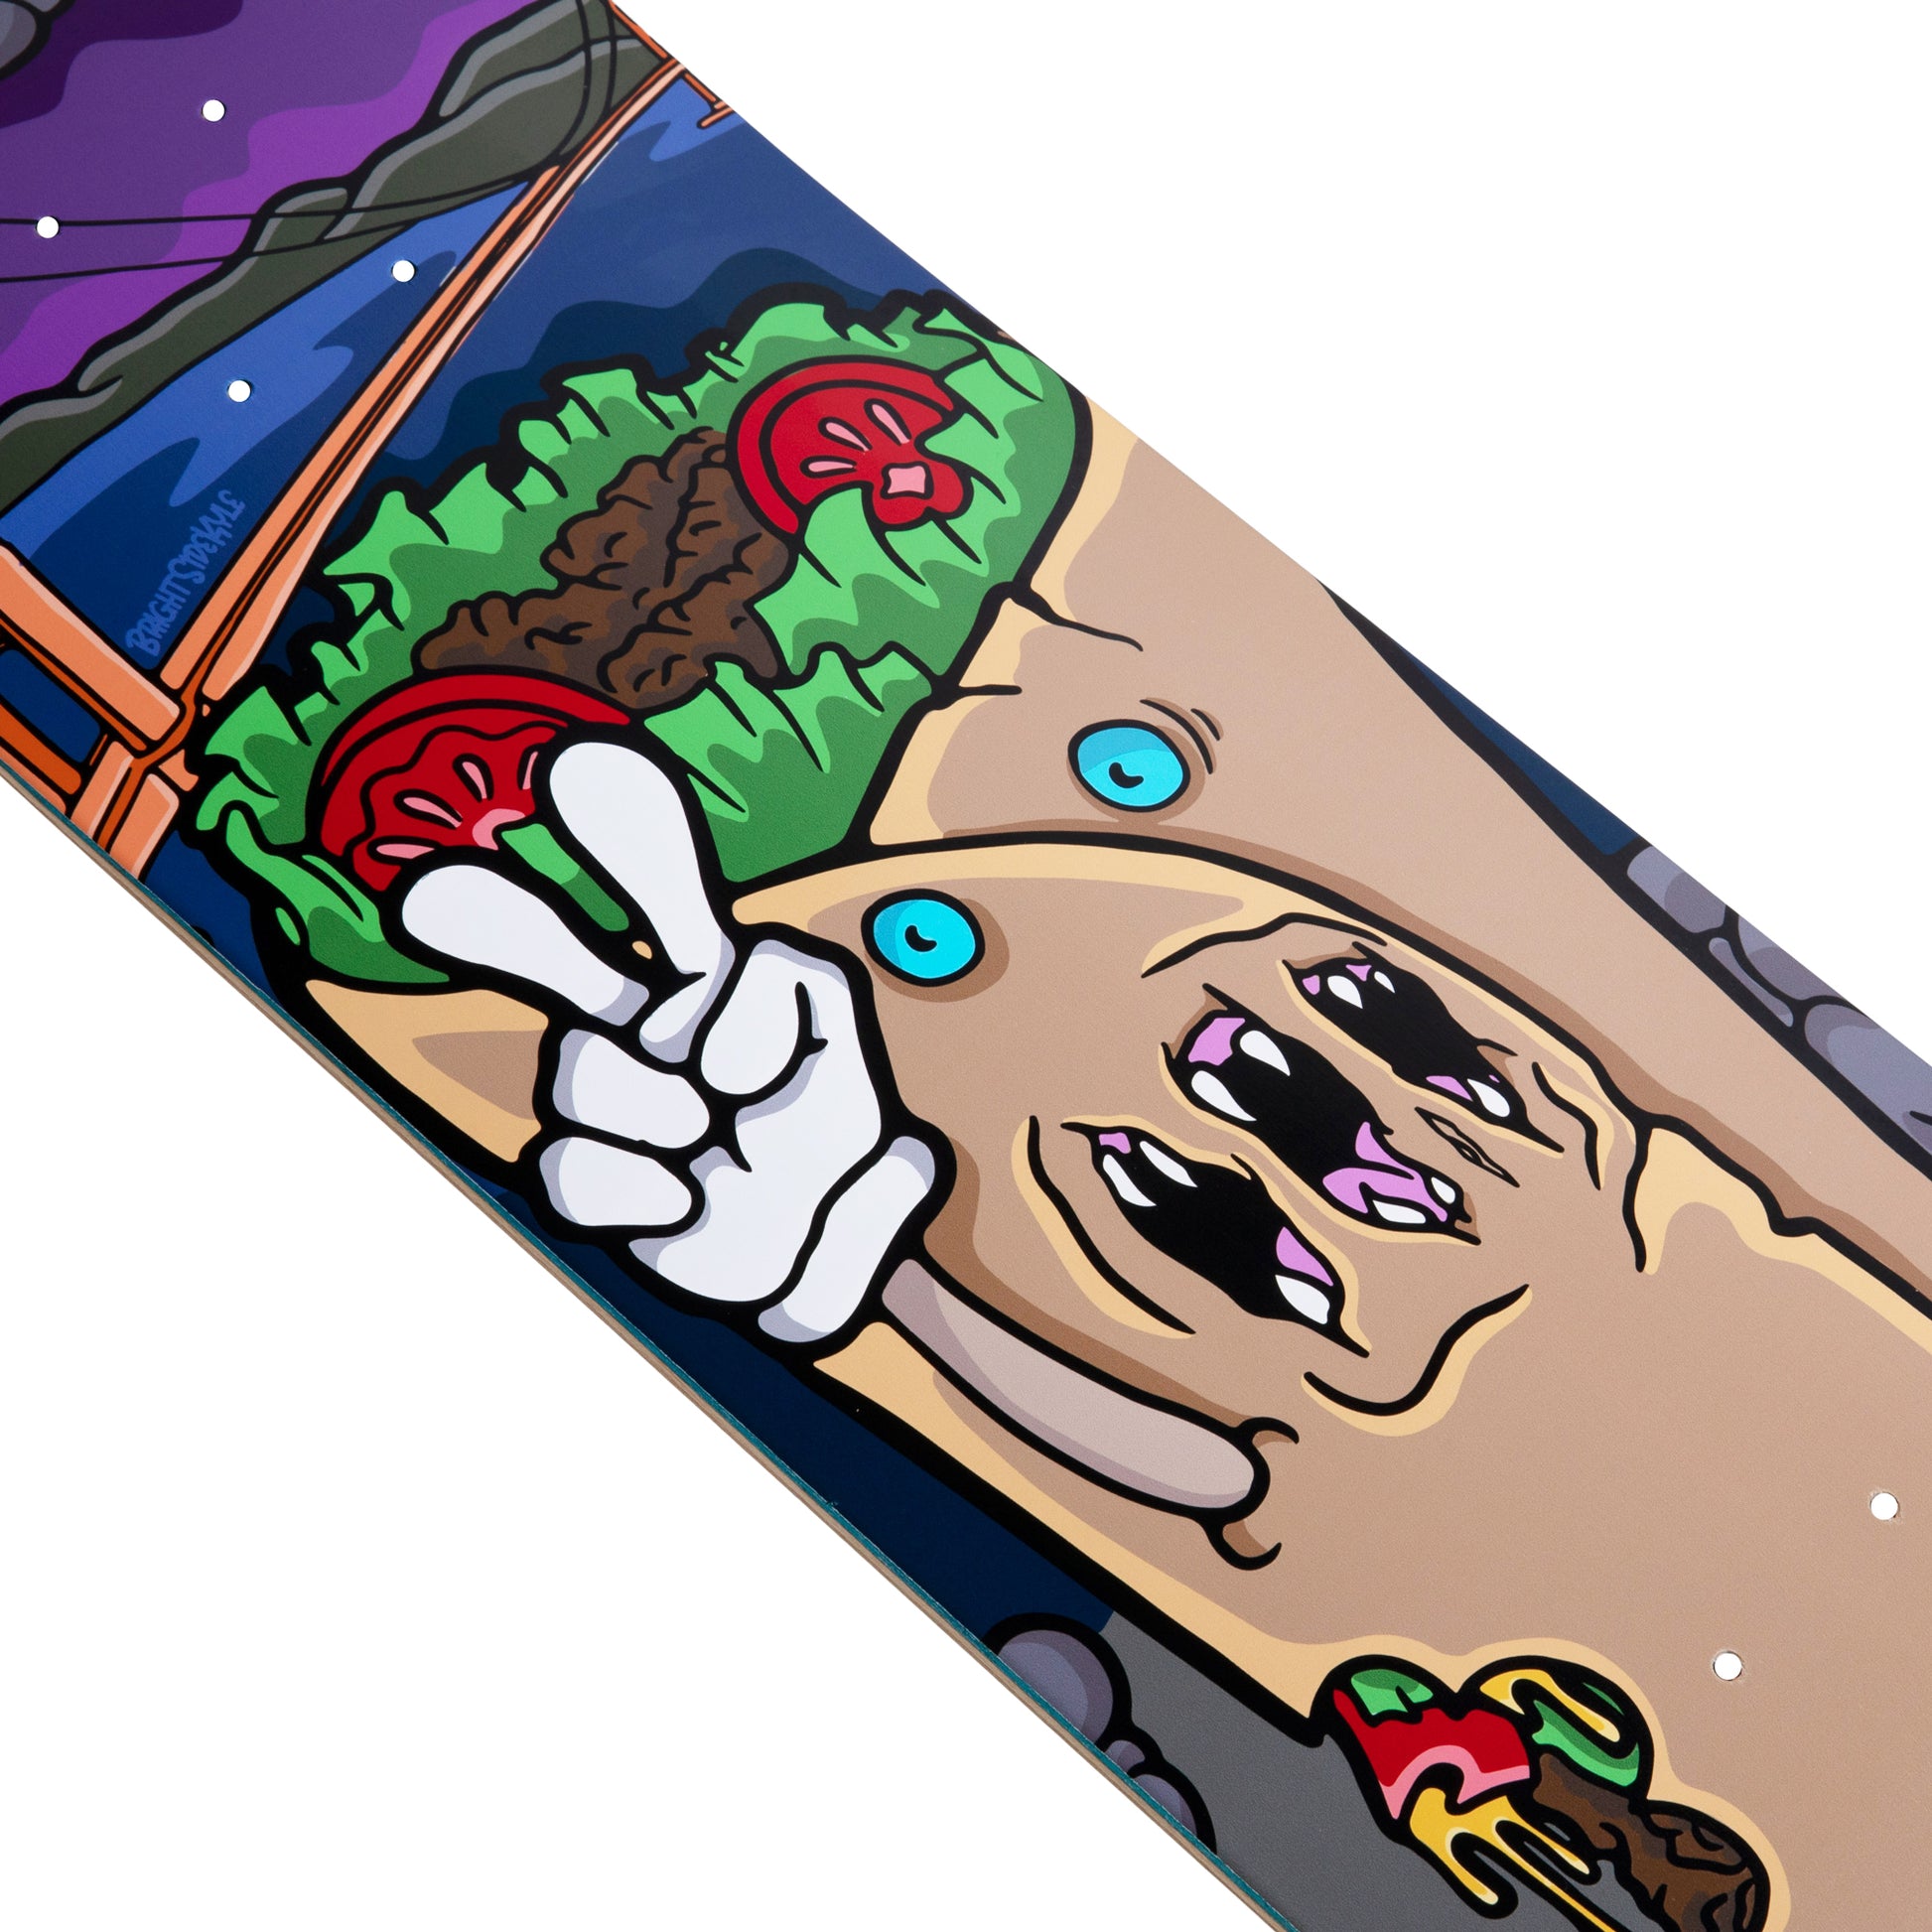 Cal 7 Zomburrito deck with San Francisco munchie takeover art on a semi-cold-press 7-ply popsicle, medium concave deck 